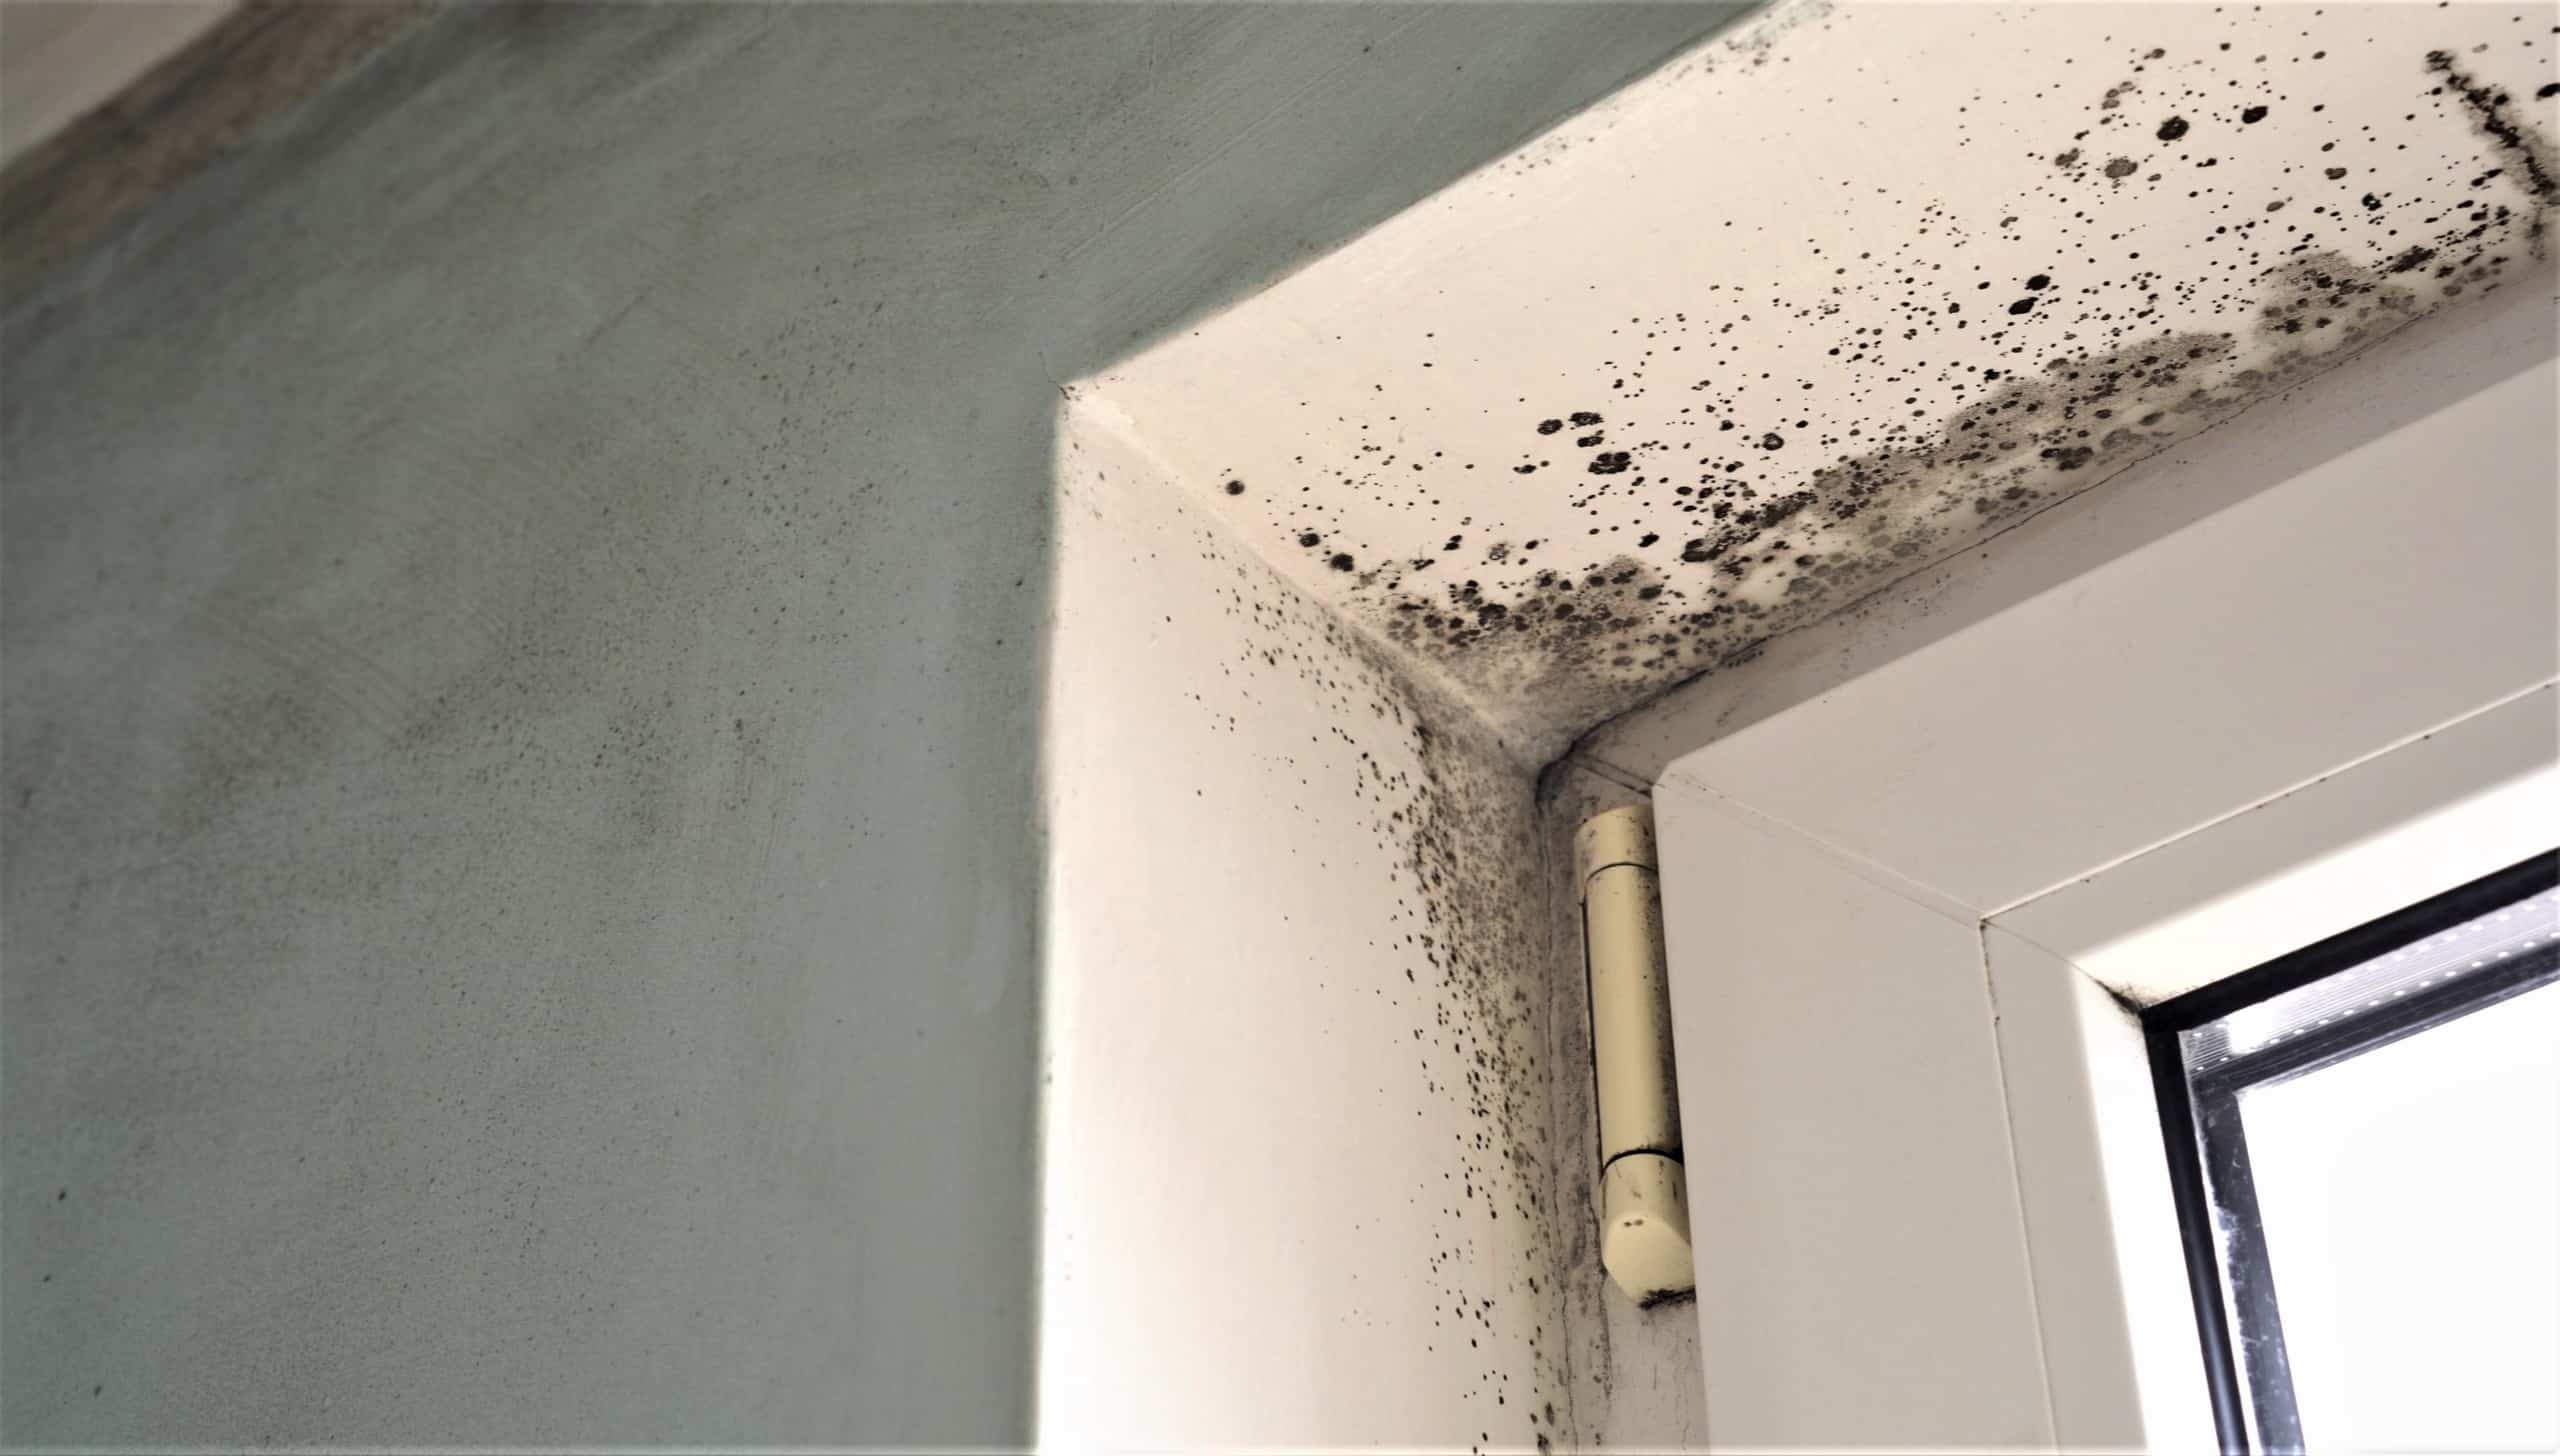 Mold Remediation Services in Ft. Lauderdale, FL